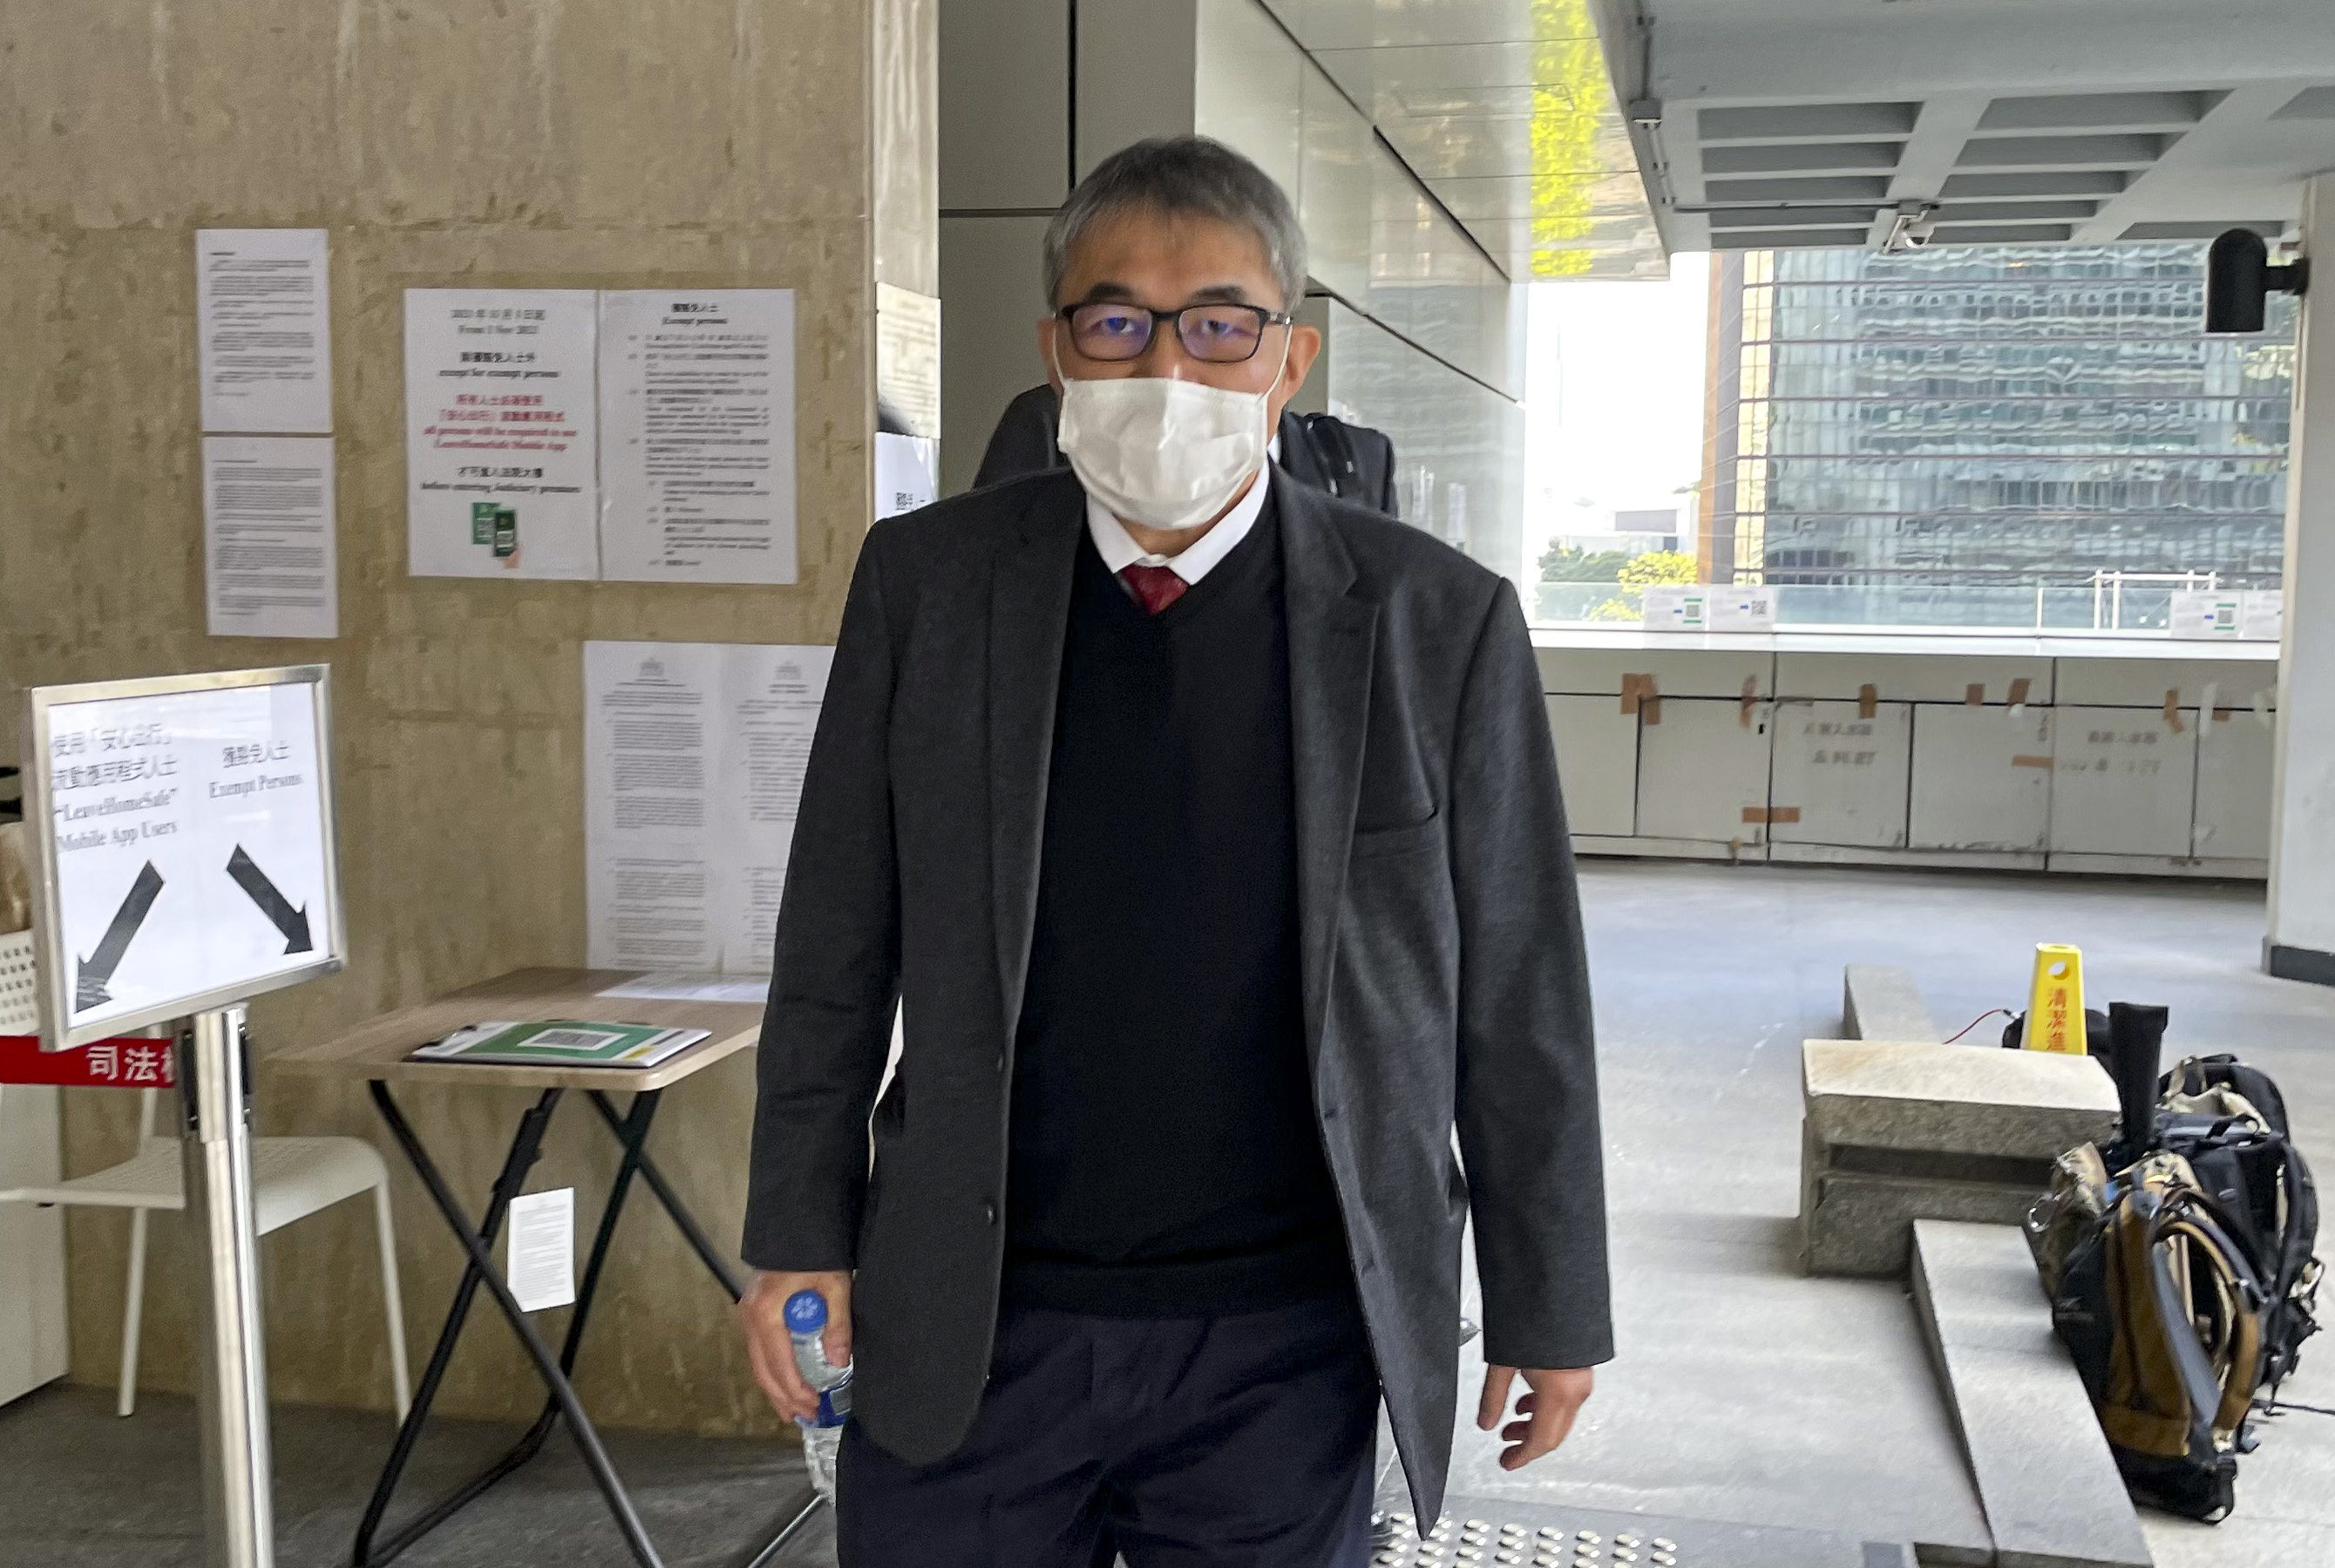 Benjamin Fok leaves the High Court on Thursday after a judge granted him and his relatives another 24 hours for talks aimed at reaching a settlement in their ongoing dispute. Photo: Jasmine Siu